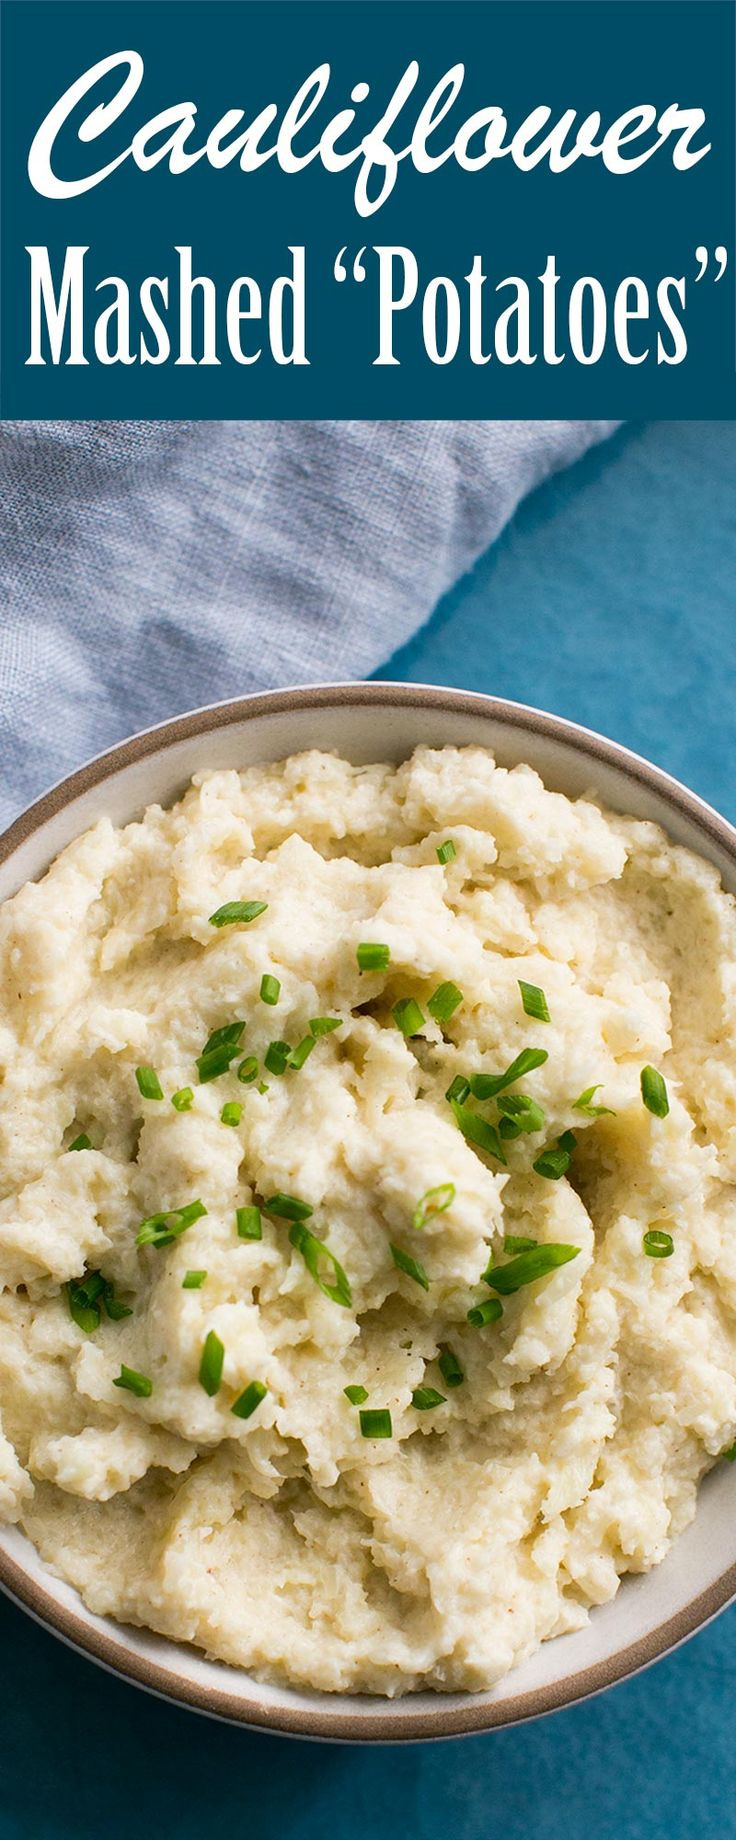 Recipe For Cauliflower Mashed Potatoes Healthy
 Best 25 Cauliflower mashed potatoes healthy ideas on